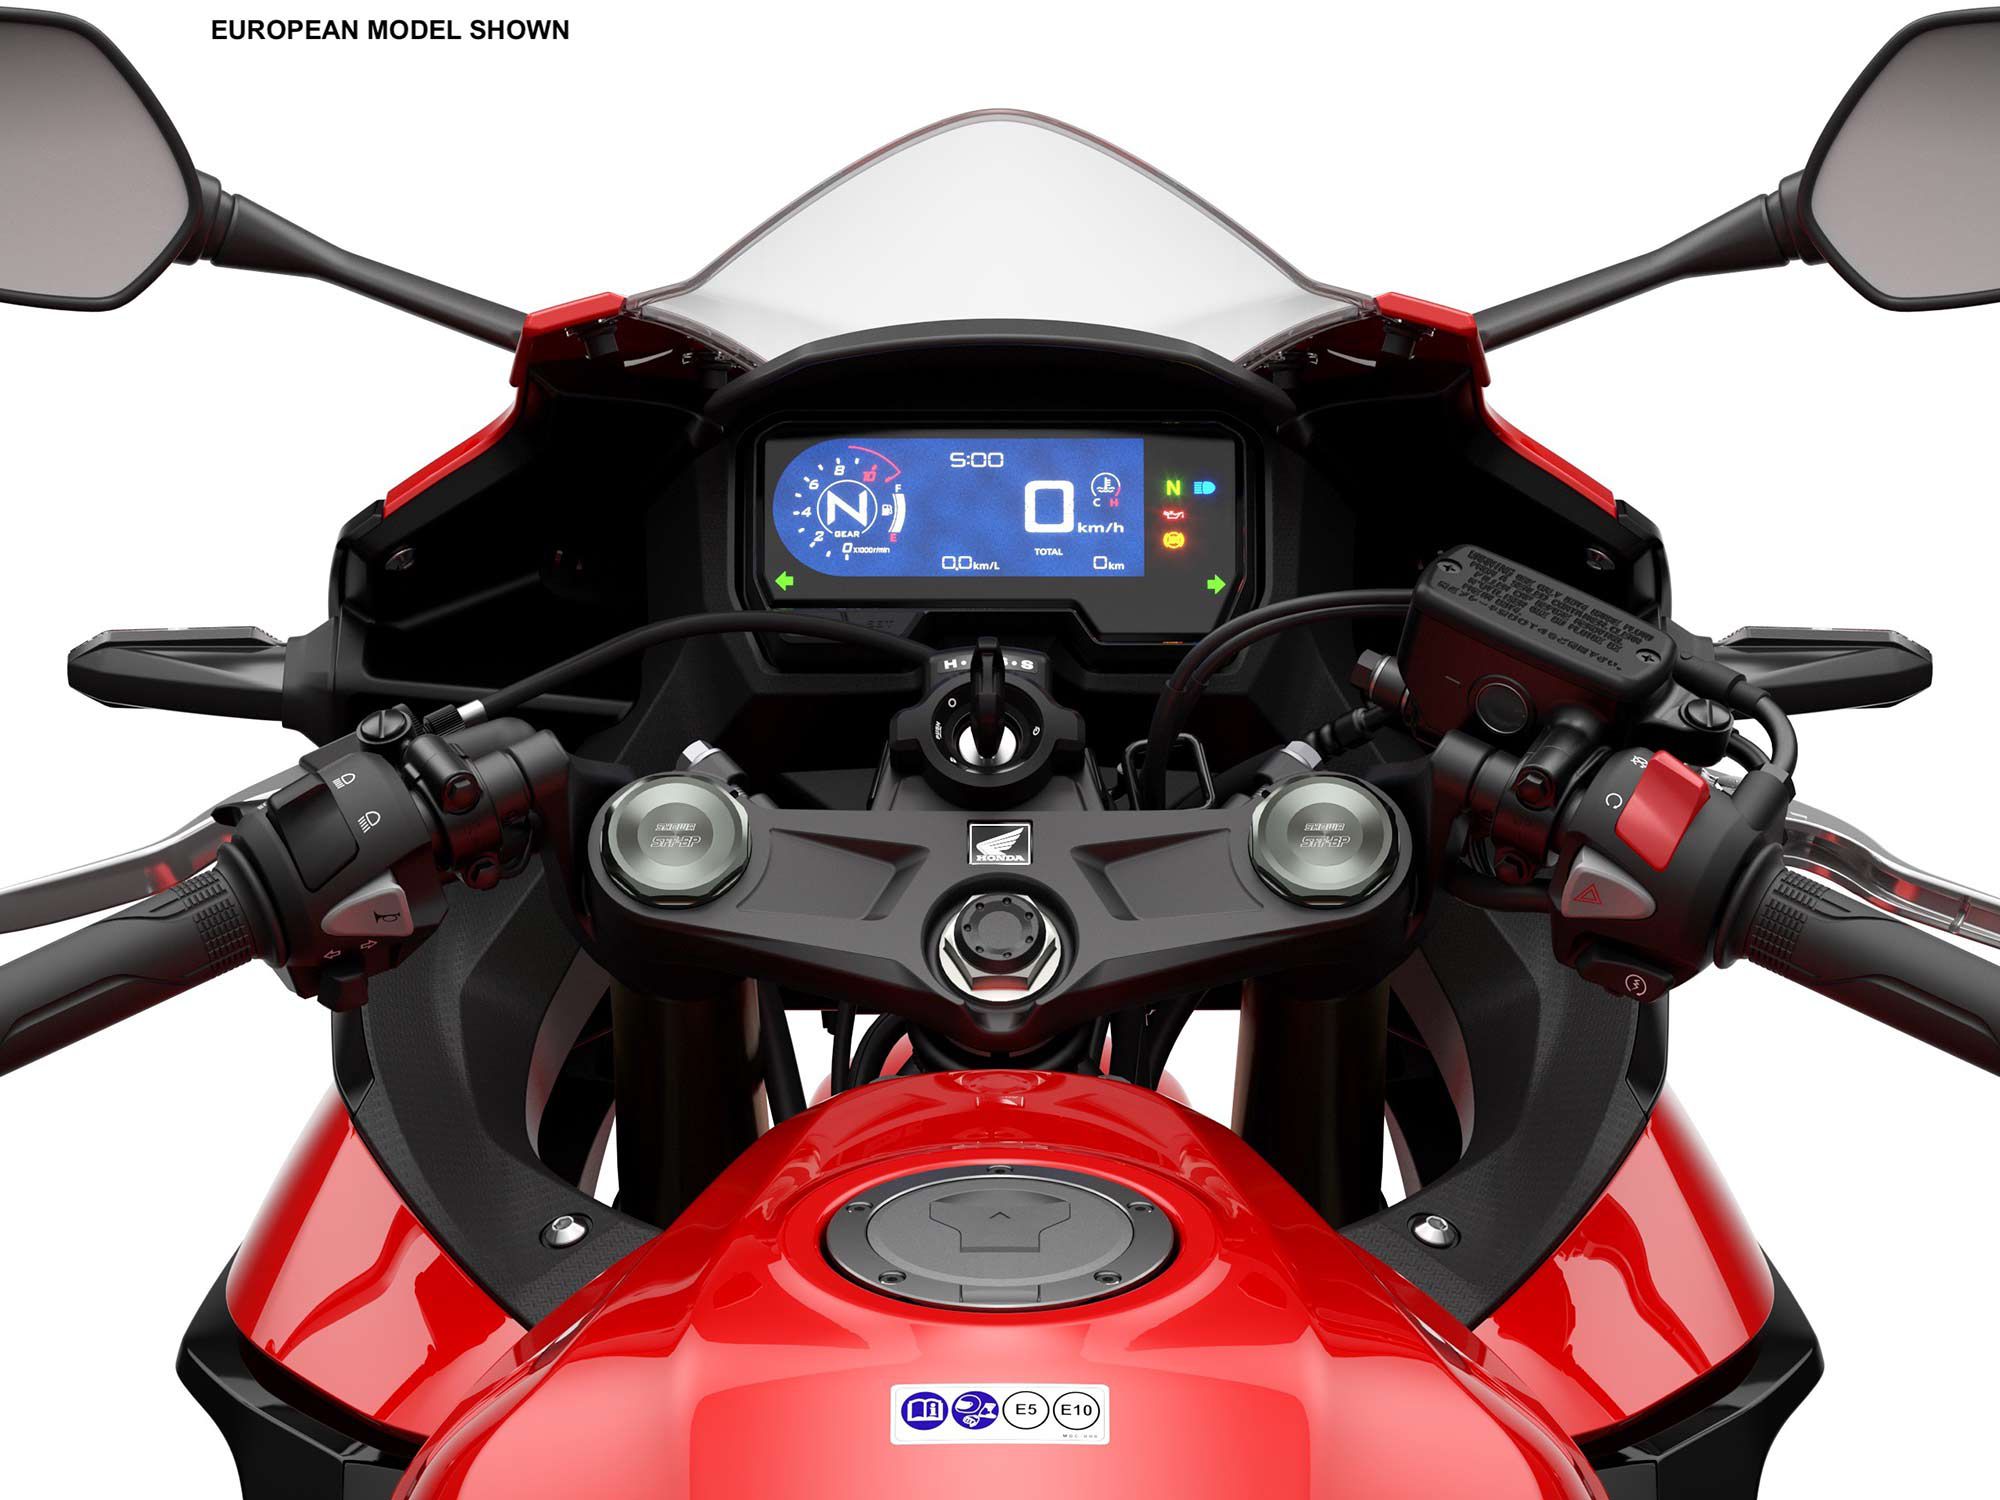 View from the CBR500R cockpit.